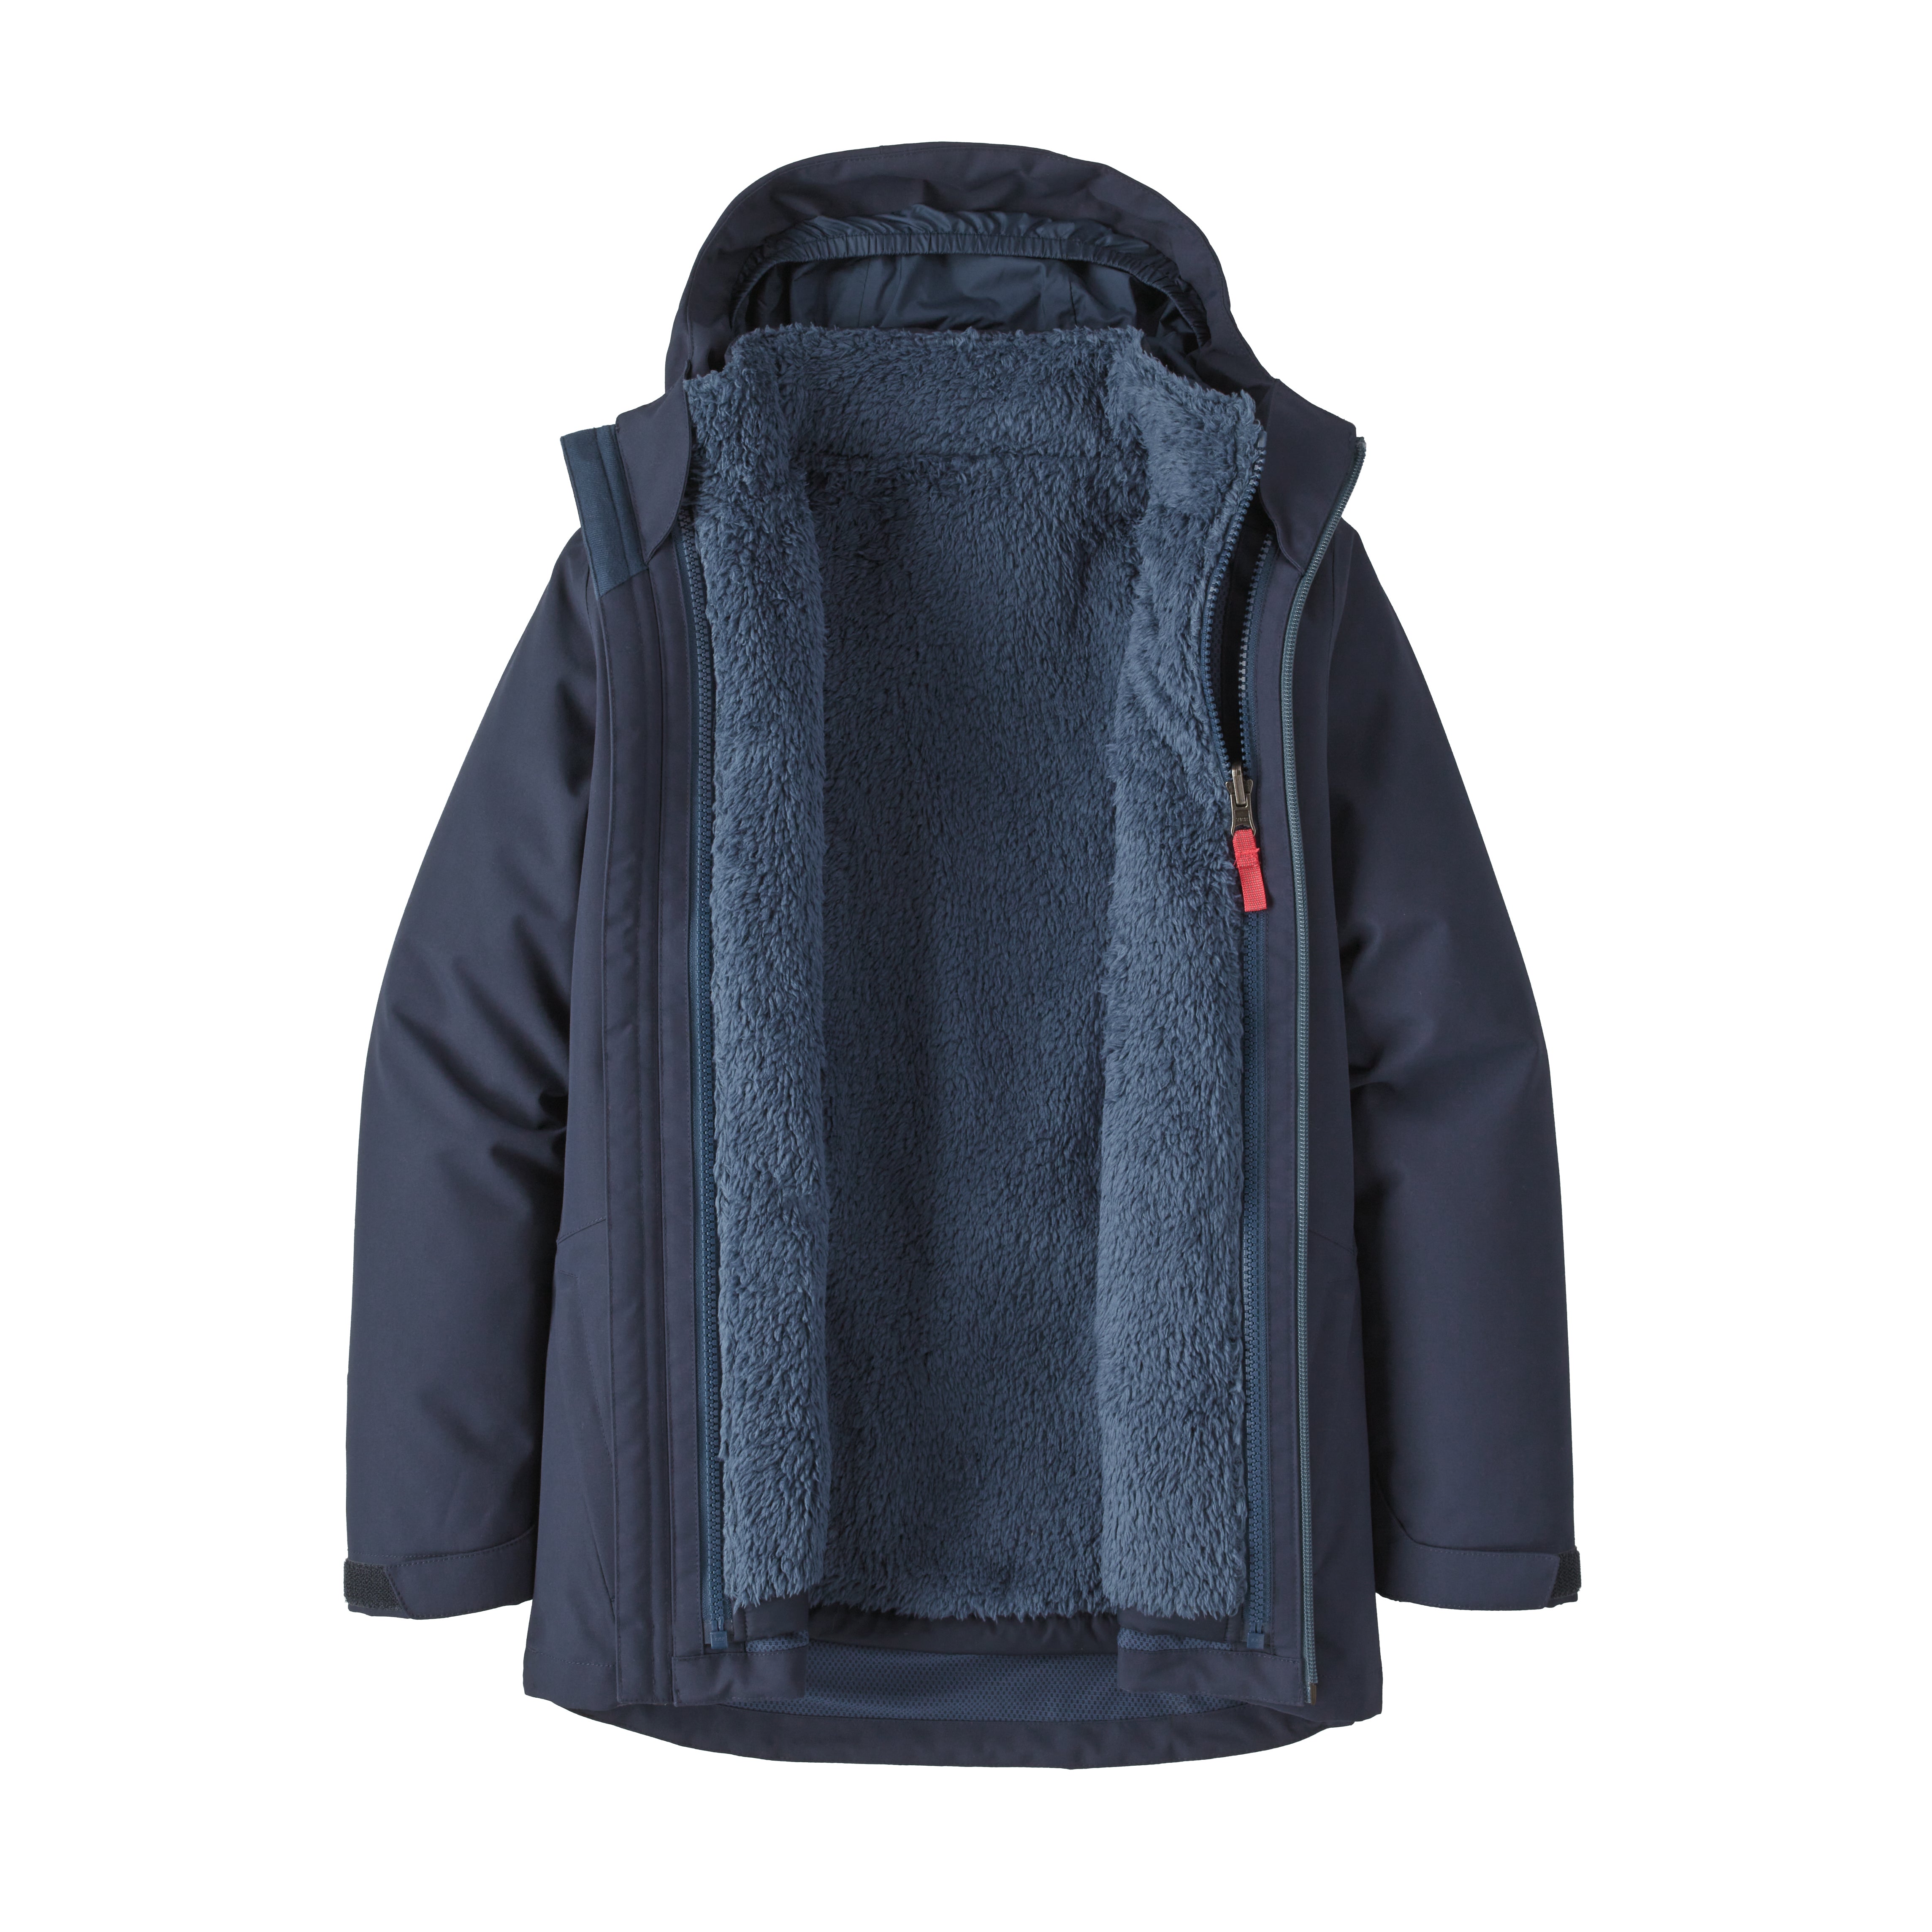 K's 4-in-1 Drop Tail Everyday Jkt